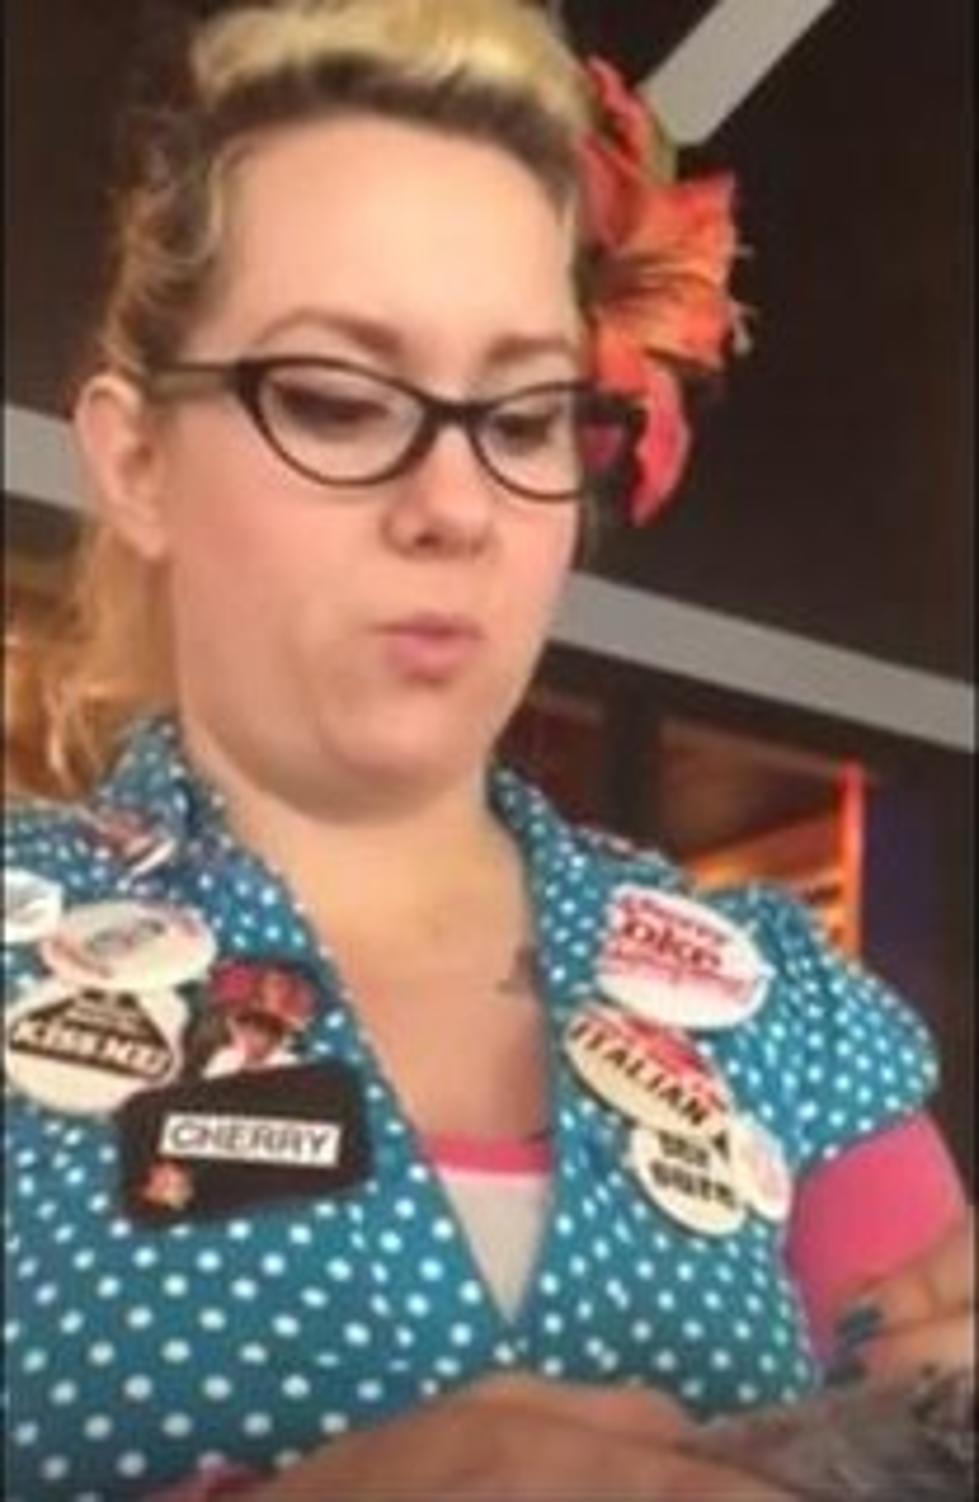 The Chicago Diner Rude Waitress Video is Going Viral [VIDEO]